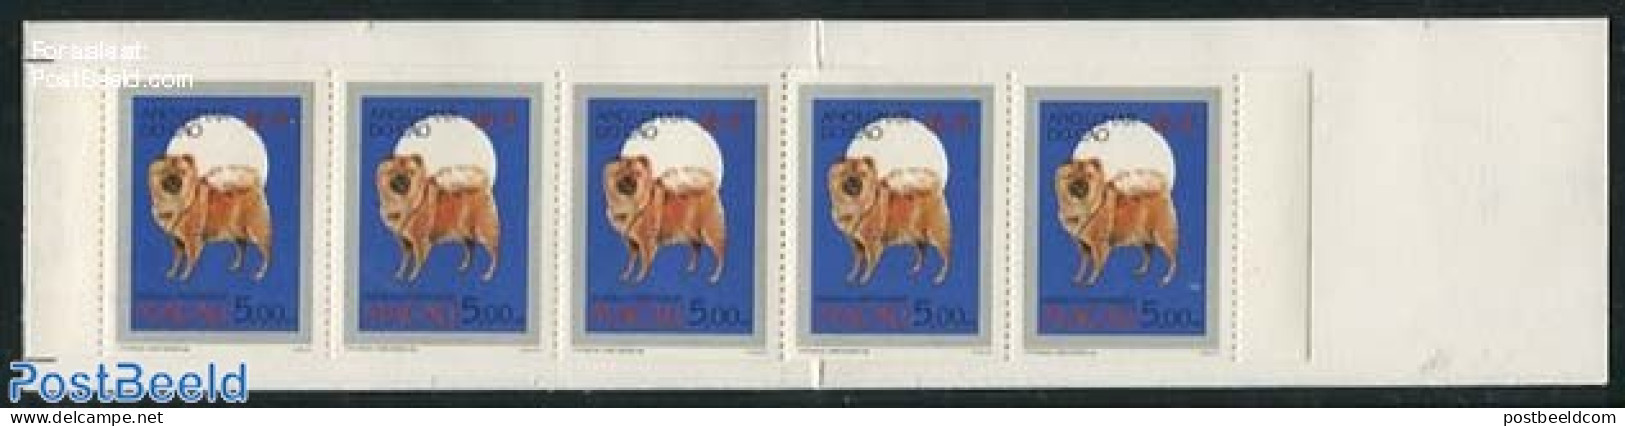 Macao 1994 Year Of The Dog Booklet, Mint NH, Stamp Booklets - Ongebruikt